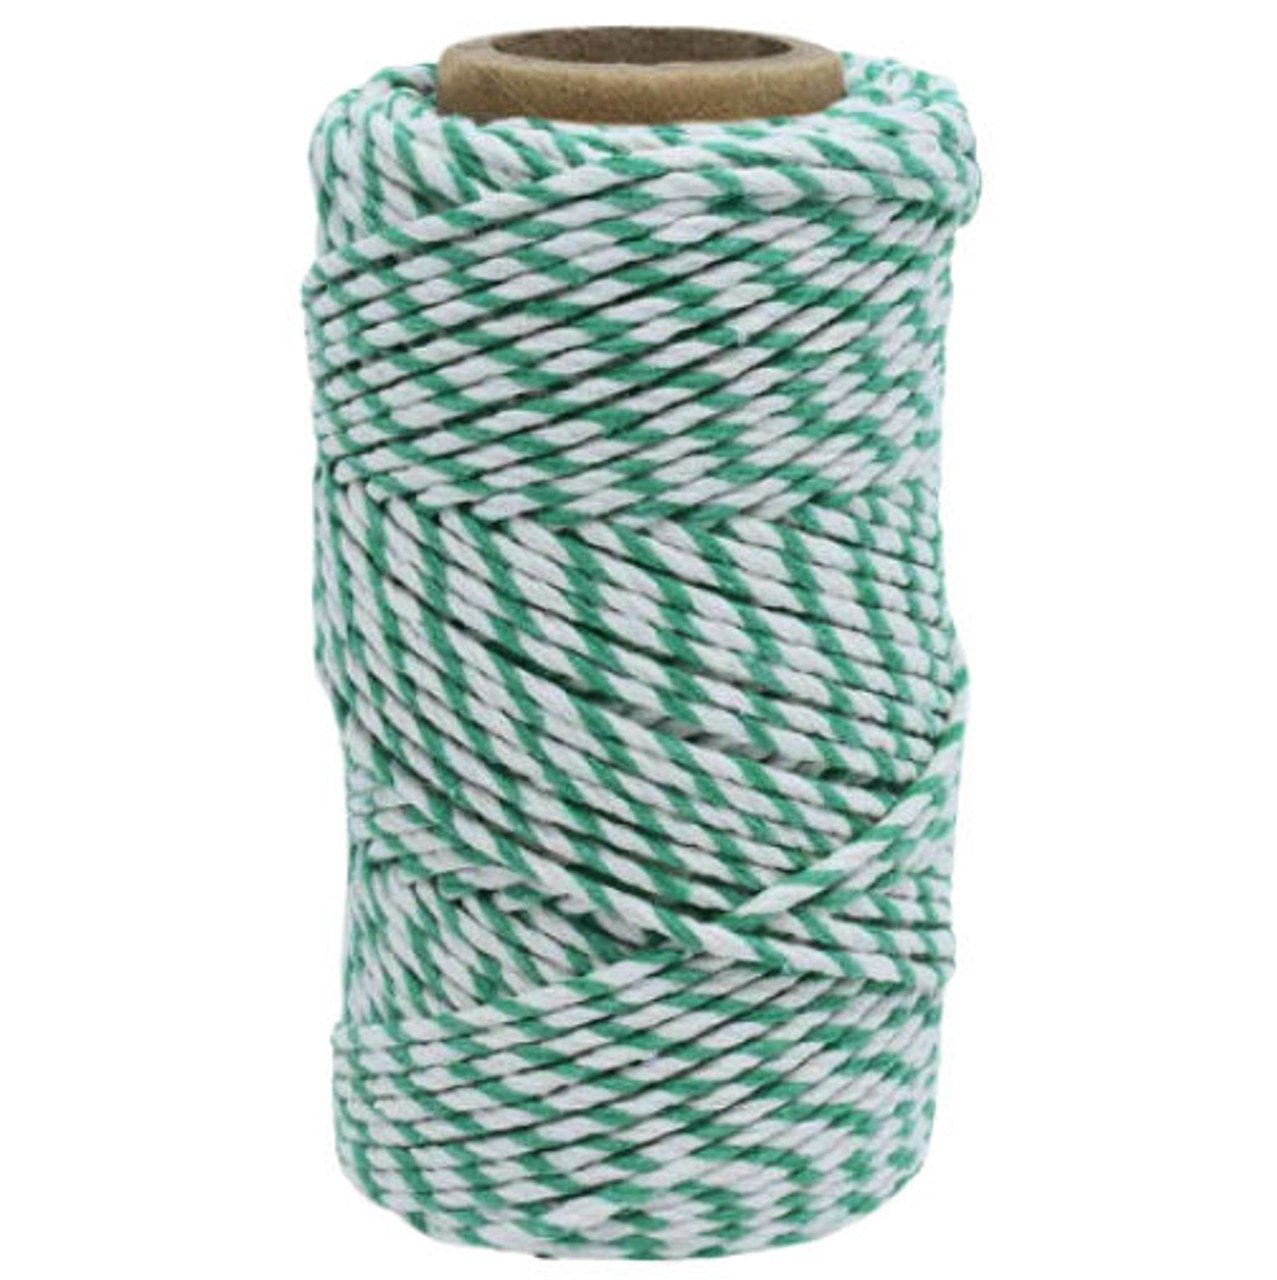 Reel x 100mt Green & White No.6 Cotton Bakers Twine